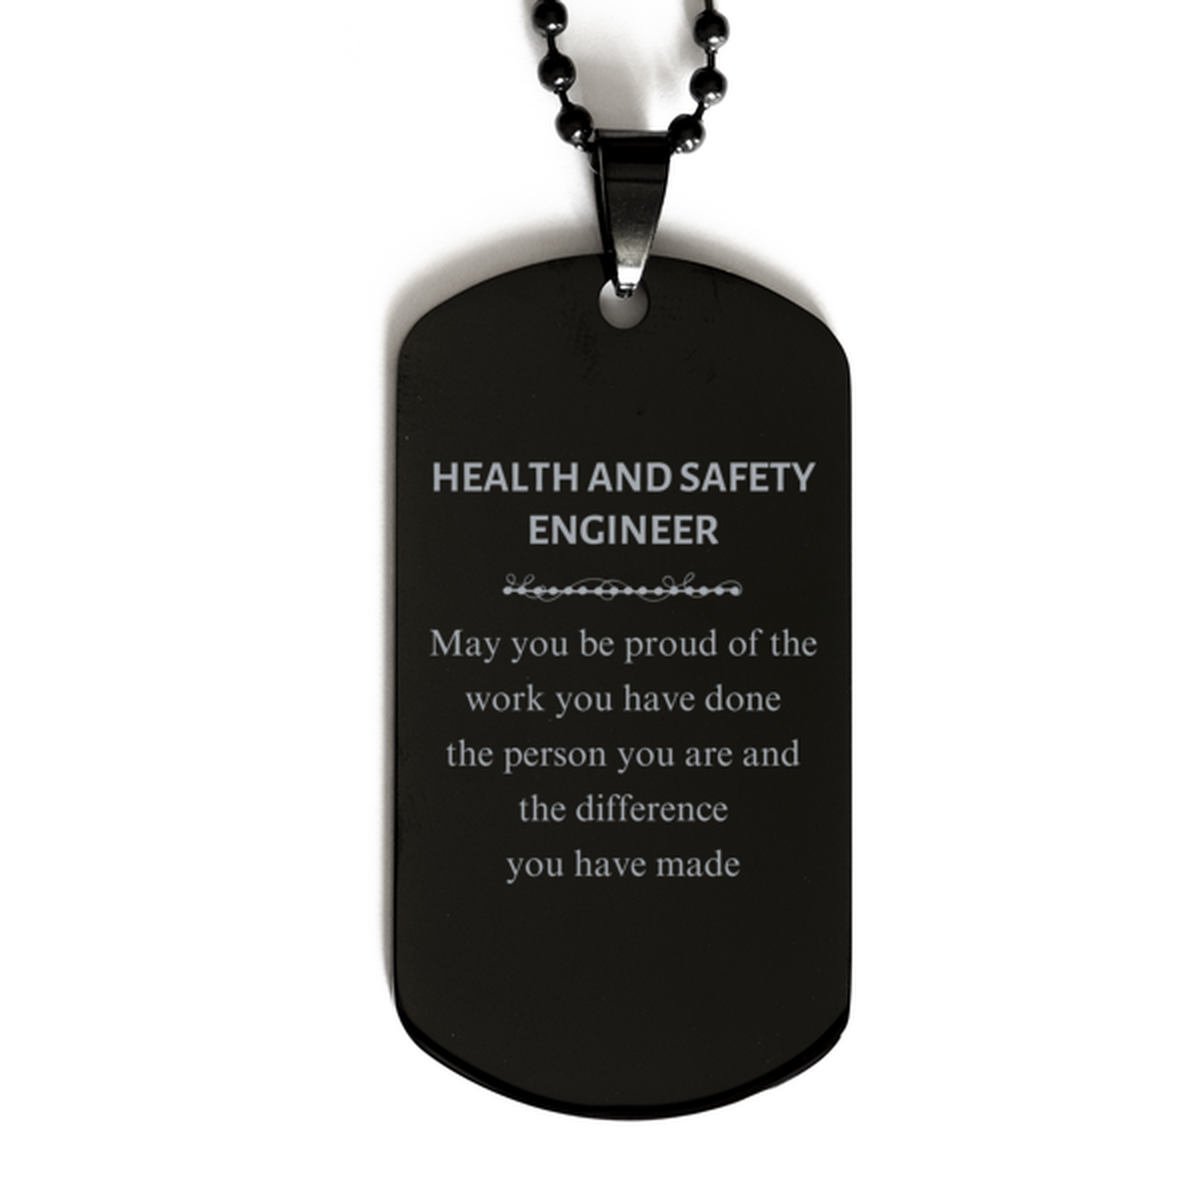 Health and Safety Engineer May you be proud of the work you have done, Retirement Health and Safety Engineer Black Dog Tag for Colleague Appreciation Gifts Amazing for Health and Safety Engineer